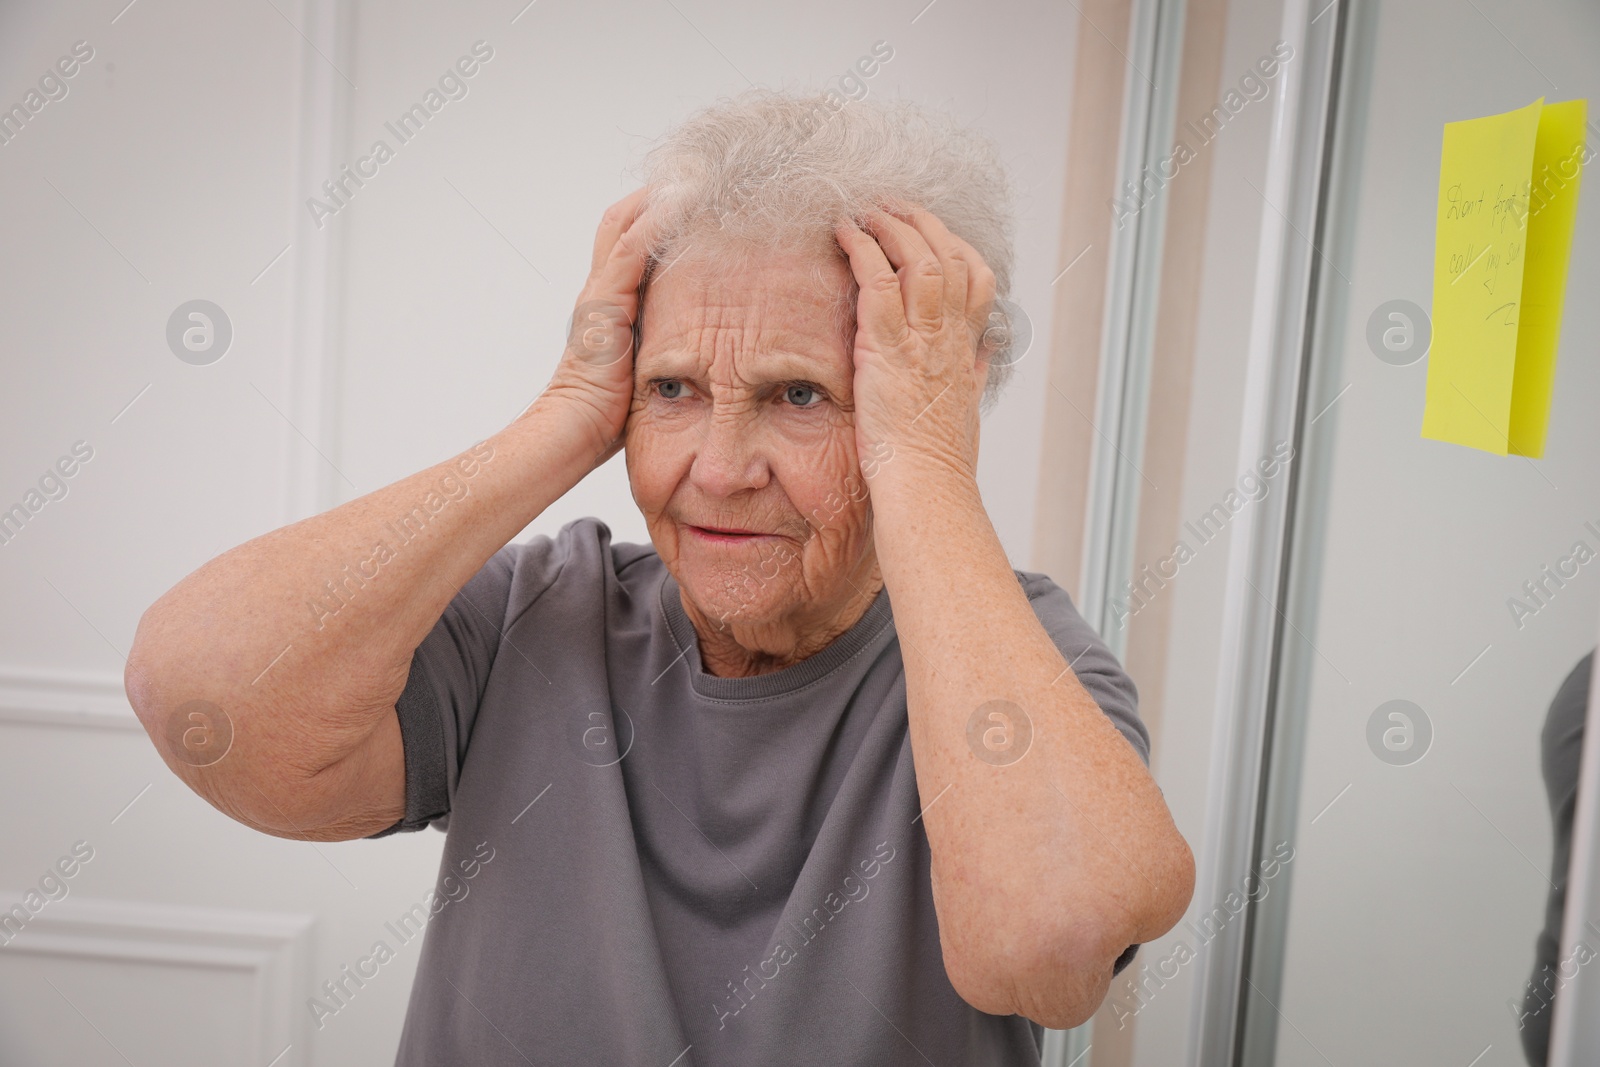 Photo of Forgetful senior woman near mirror with reminder note indoors. Age-related memory impairment